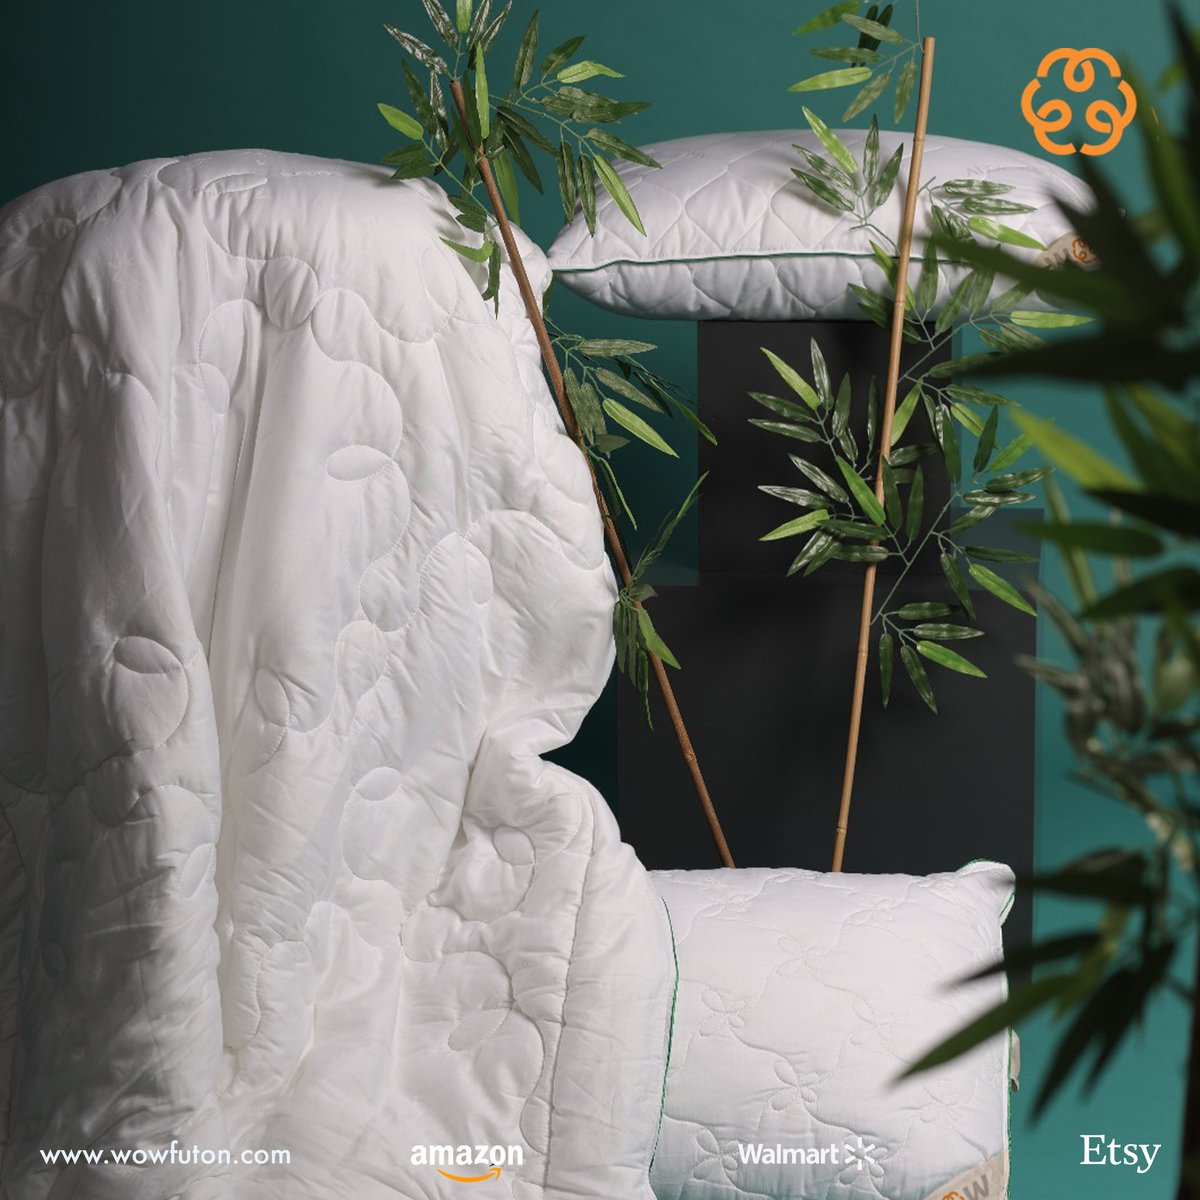 💤 Discover the miracle of bamboo with the signature WoW Futon. To always sleep better.

#wowfuton
#organicmattress 
#amazon
#bamboo 
#bamboopillow 
#etsy